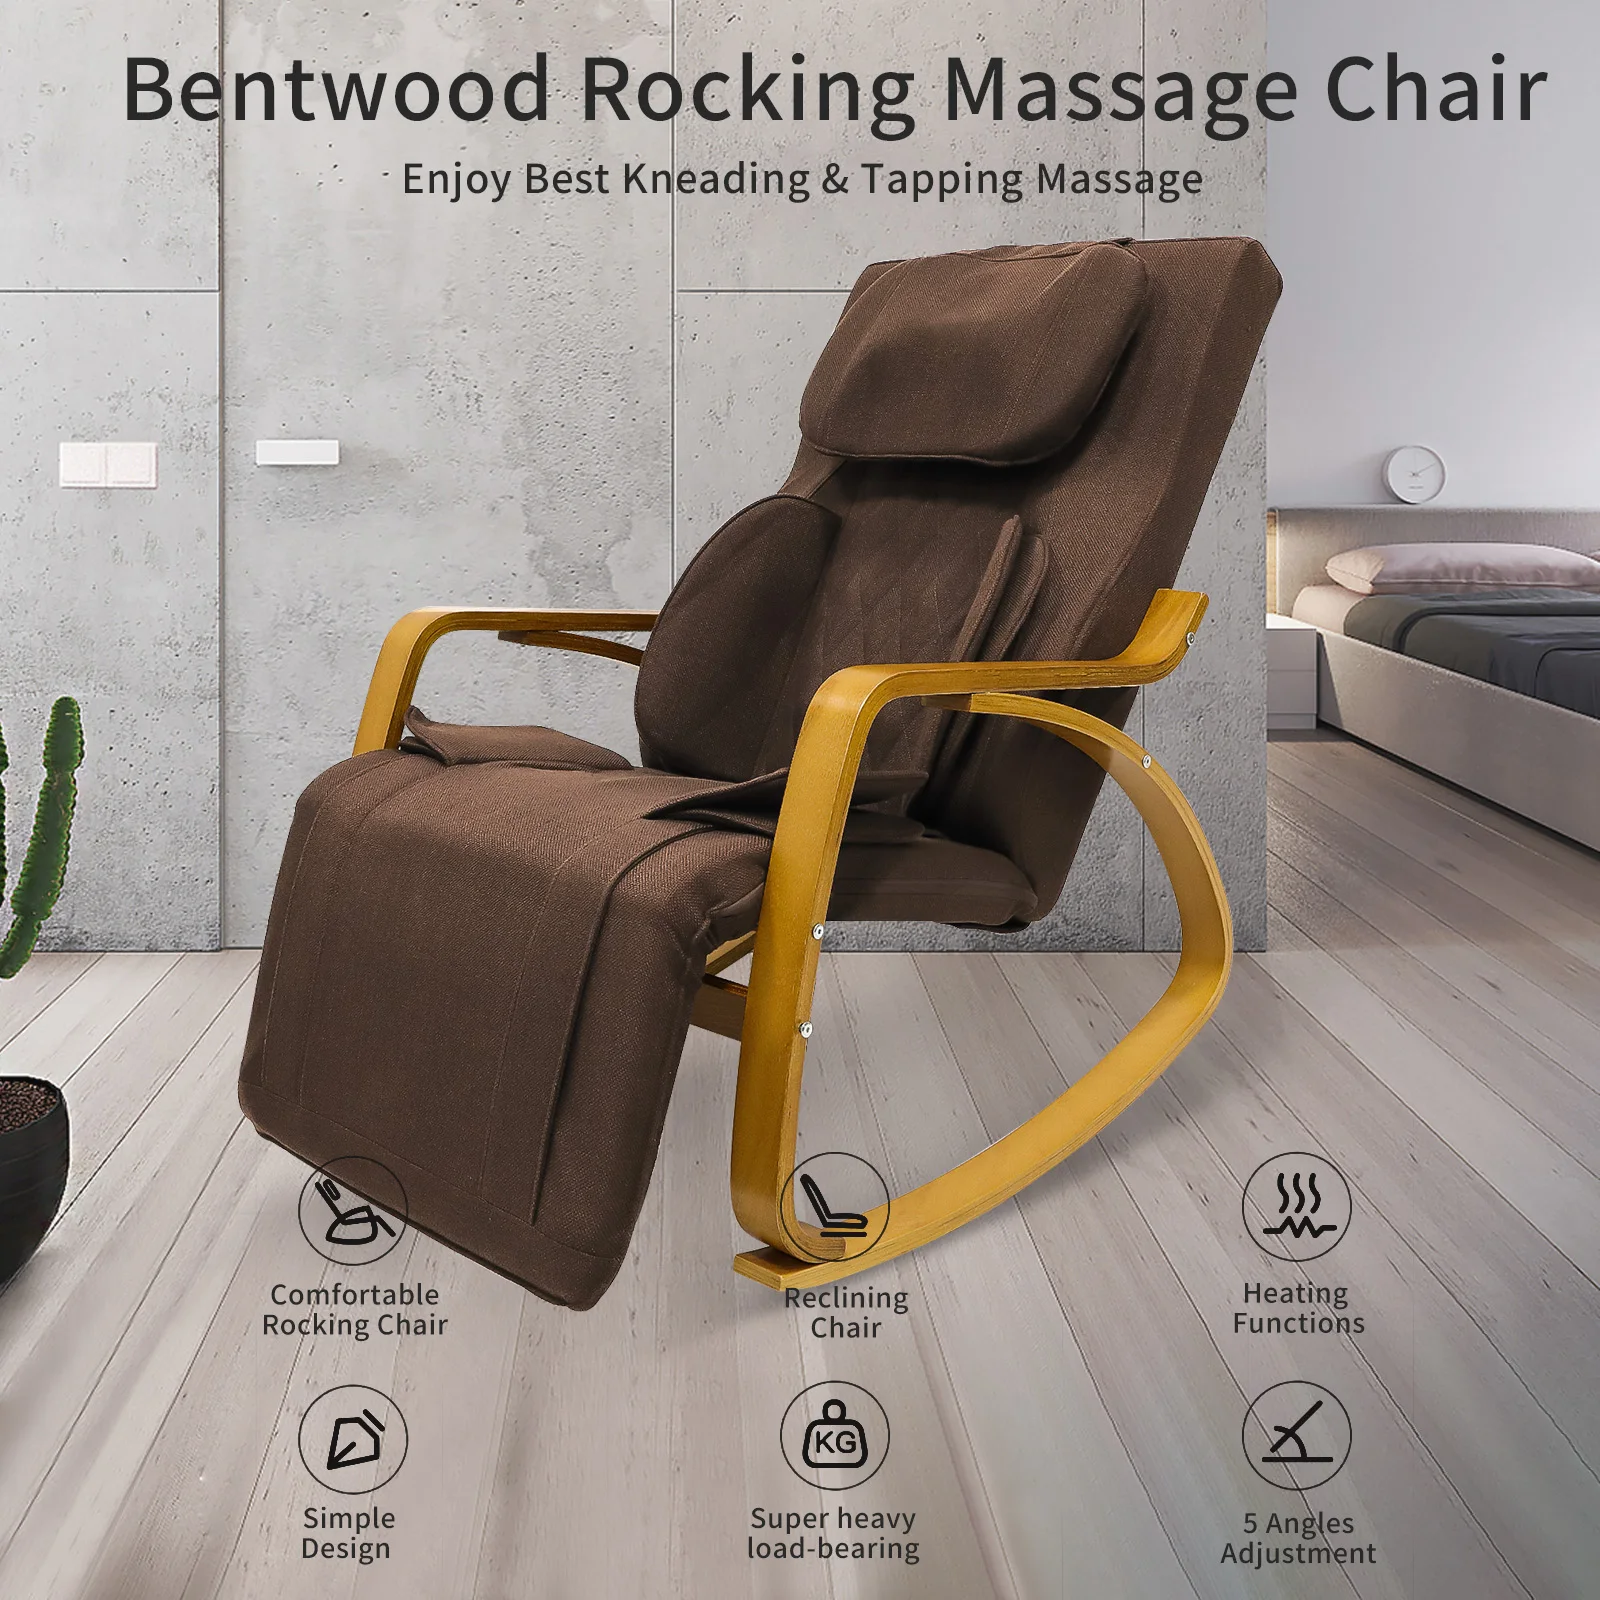 1INCH Rocking Chair Full Back Neck and Shoulder Shiatsu Massager Chair Beige Vibrating and Heating With Electric Full Body Comfortable Relax Massage Lounge Recliner 